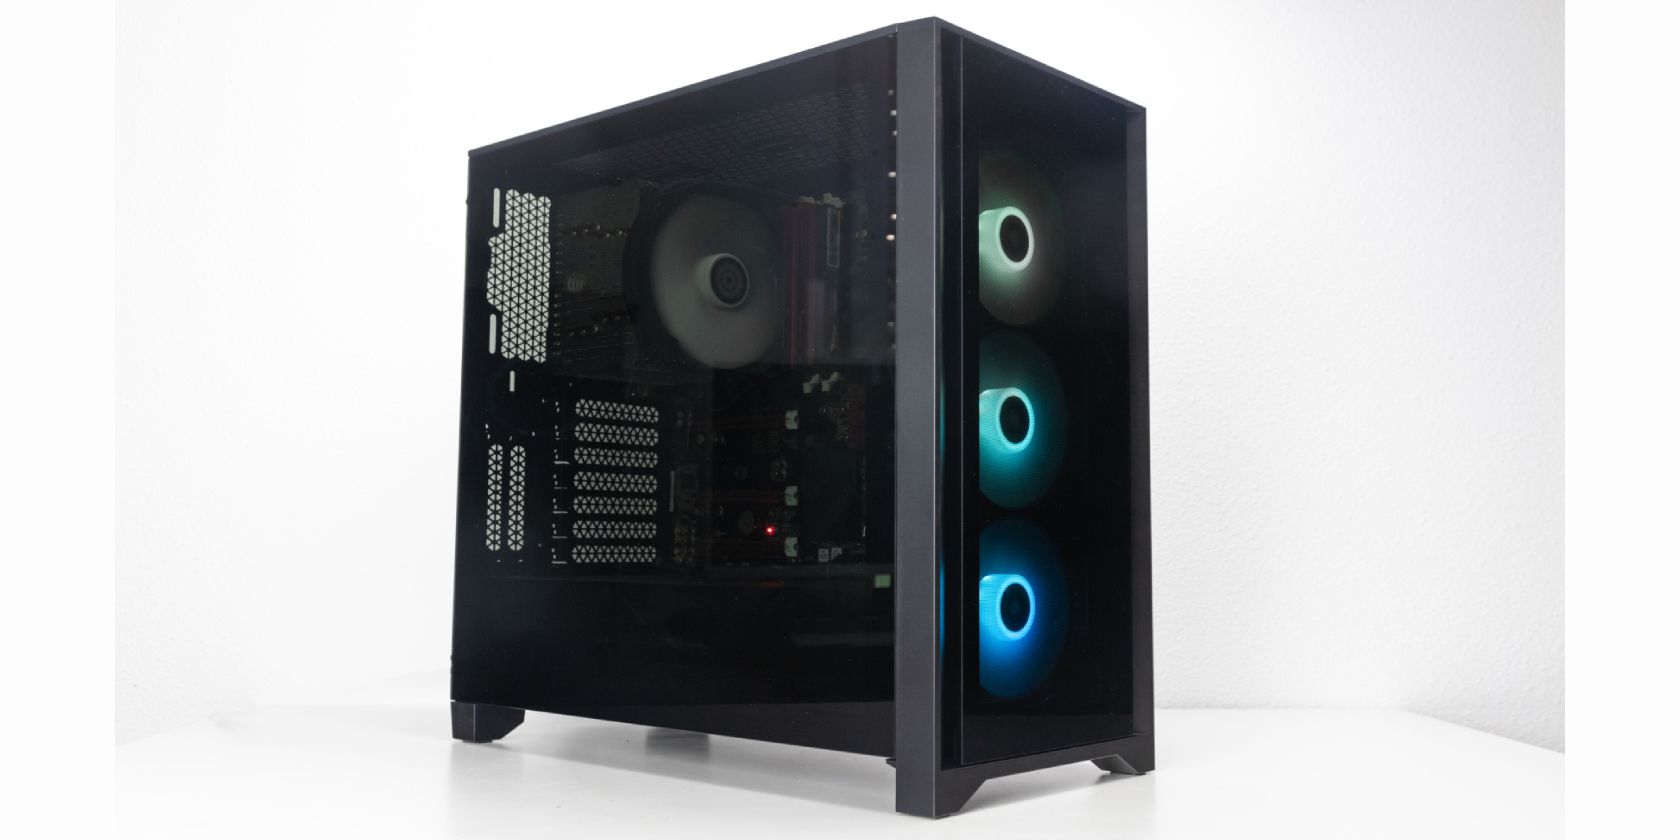 You can build a glassy-looking PC inside this Corsair case that's on sale  for $100